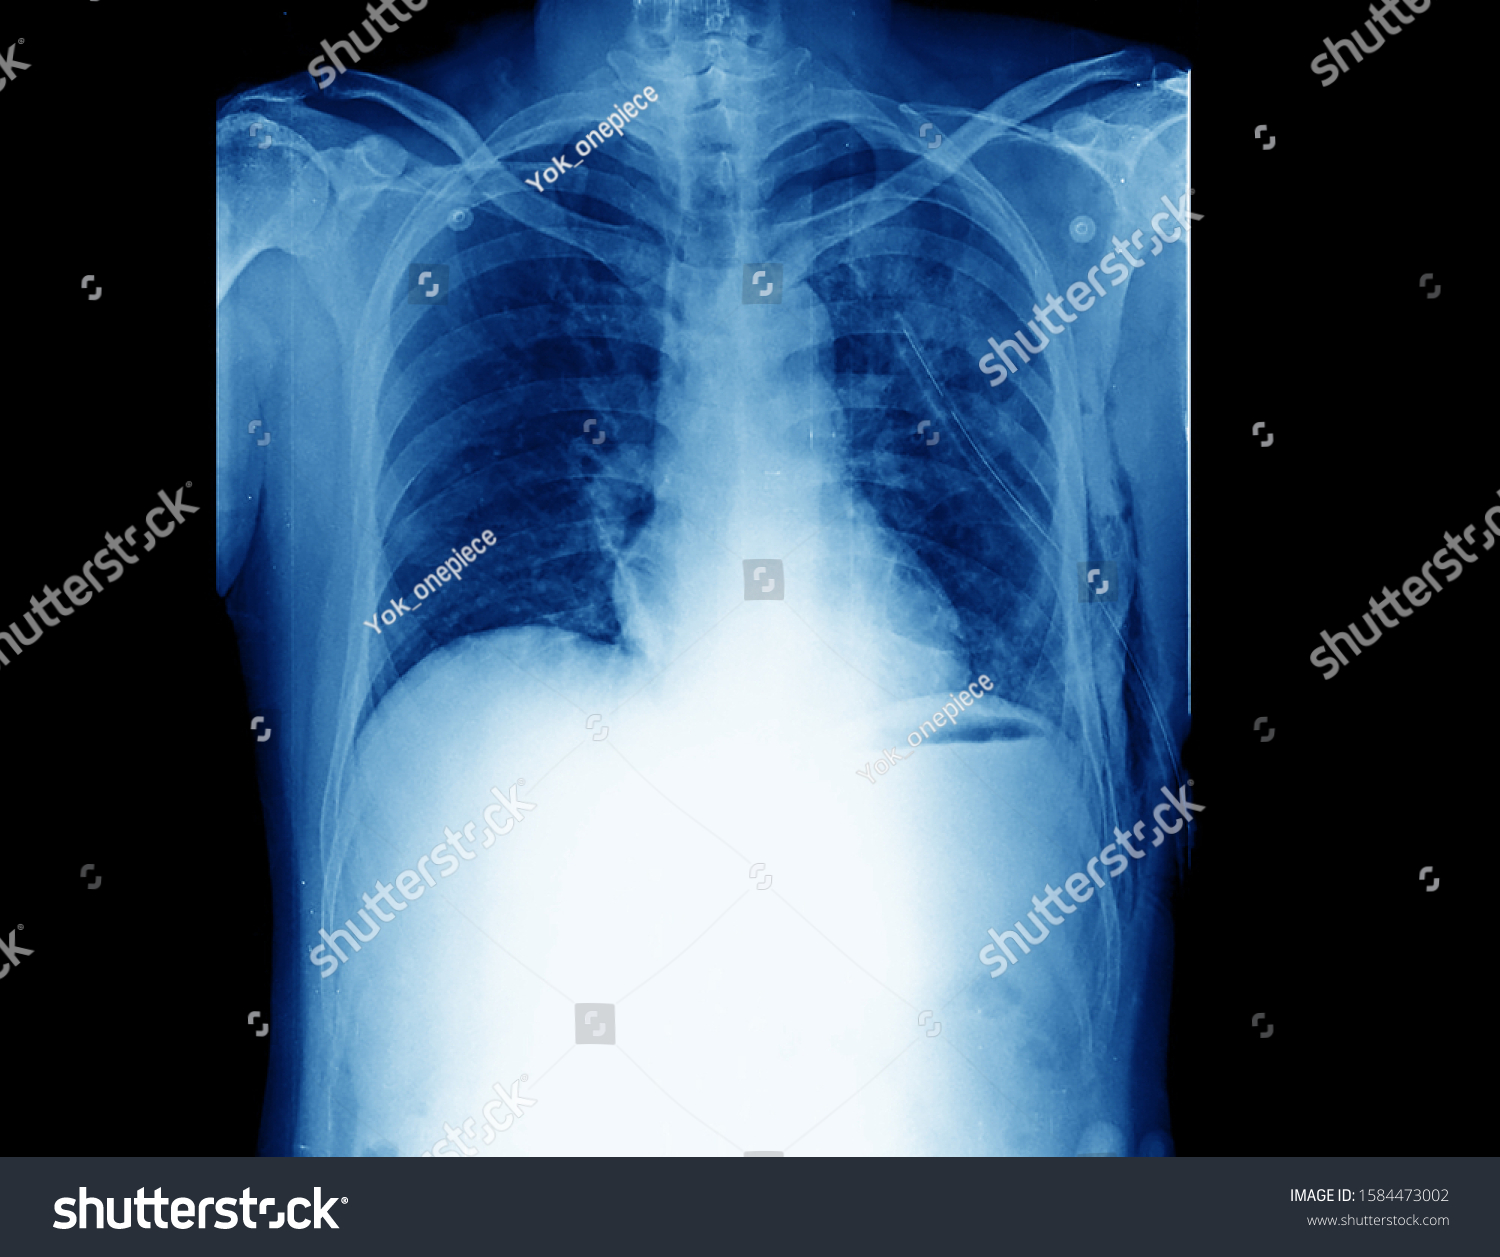 Chest Xray Showing Tension Pneumothorax On Stock Photo 1584473002 ...